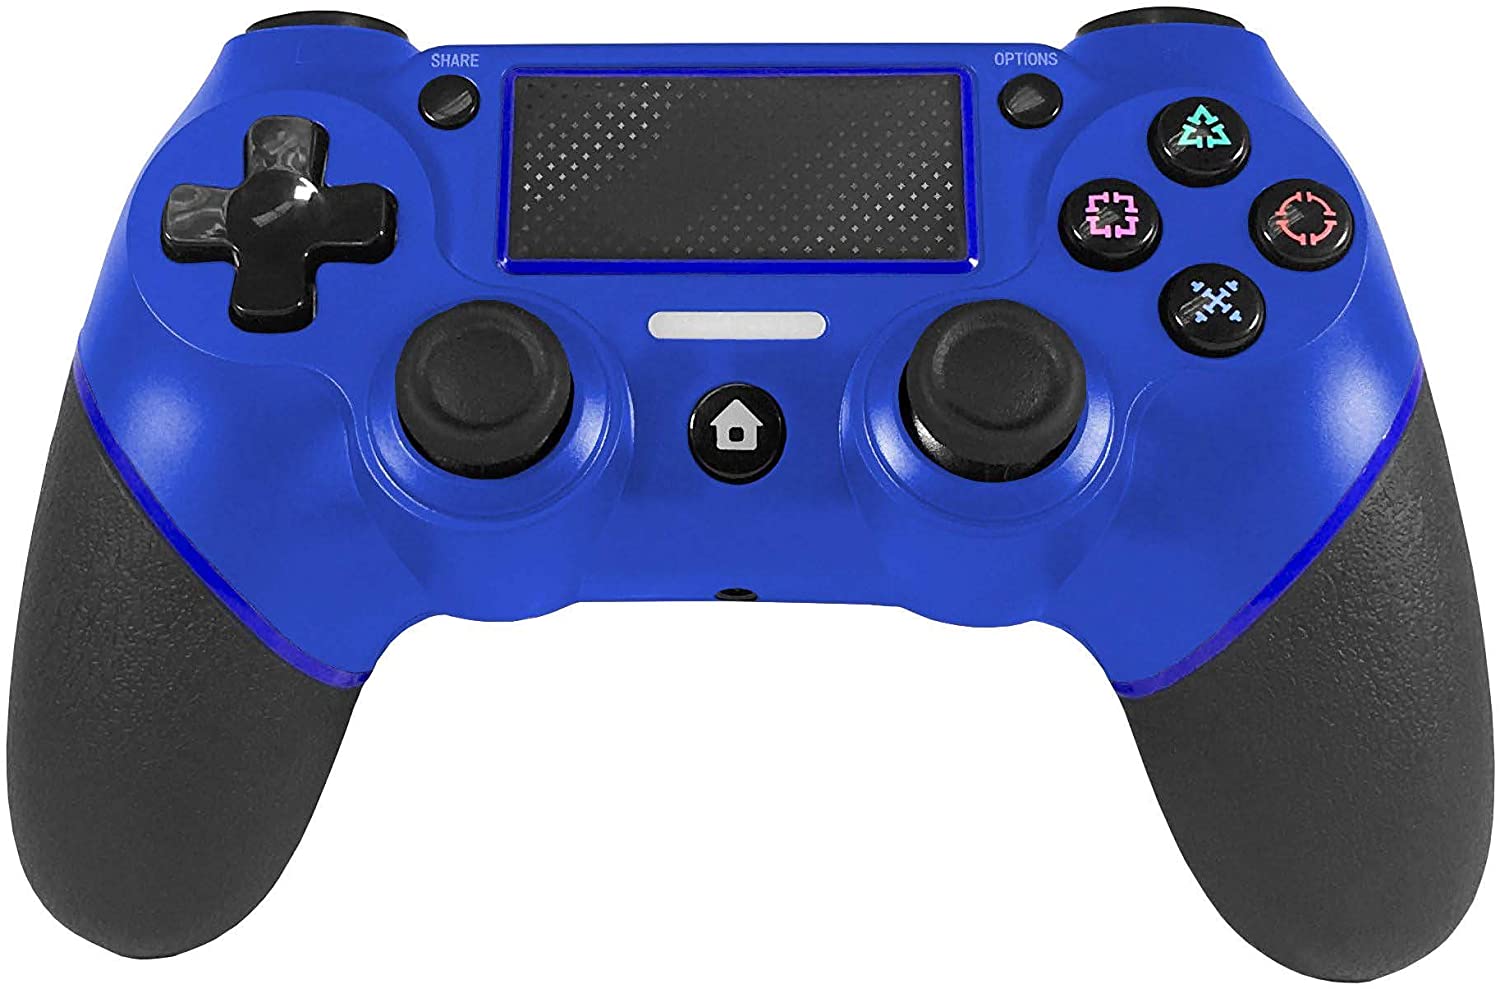 TTX PlayStation 4 Champion Wired Controller (Blue) - (PS4) PlayStation 4 Accessories TTX Tech   